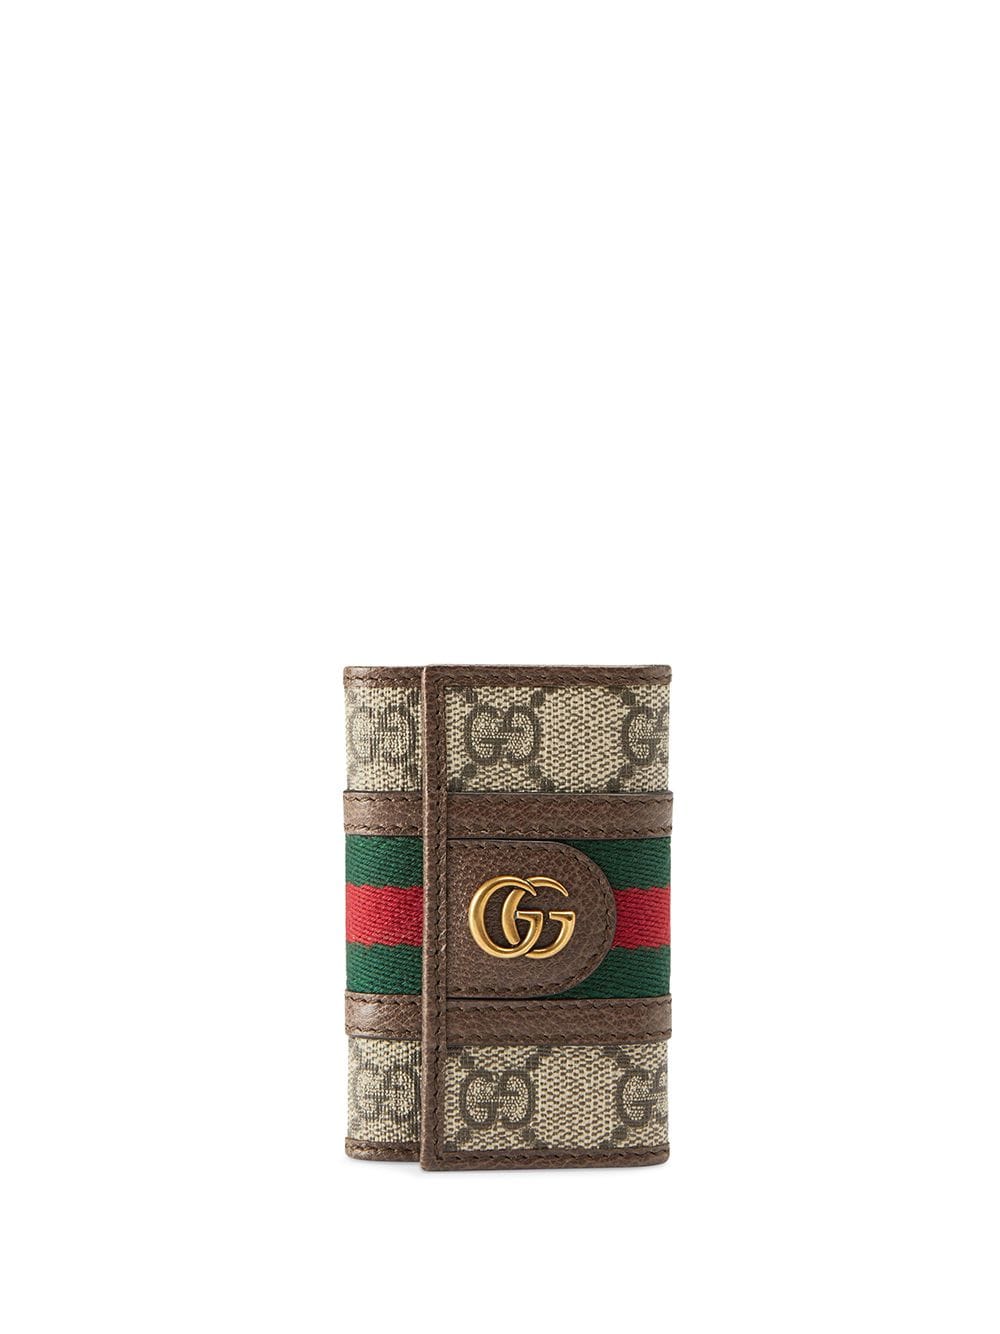 GUCCI Ophidia 2019-20FW Ophidia Keychain (523161 HE2NG 8742)